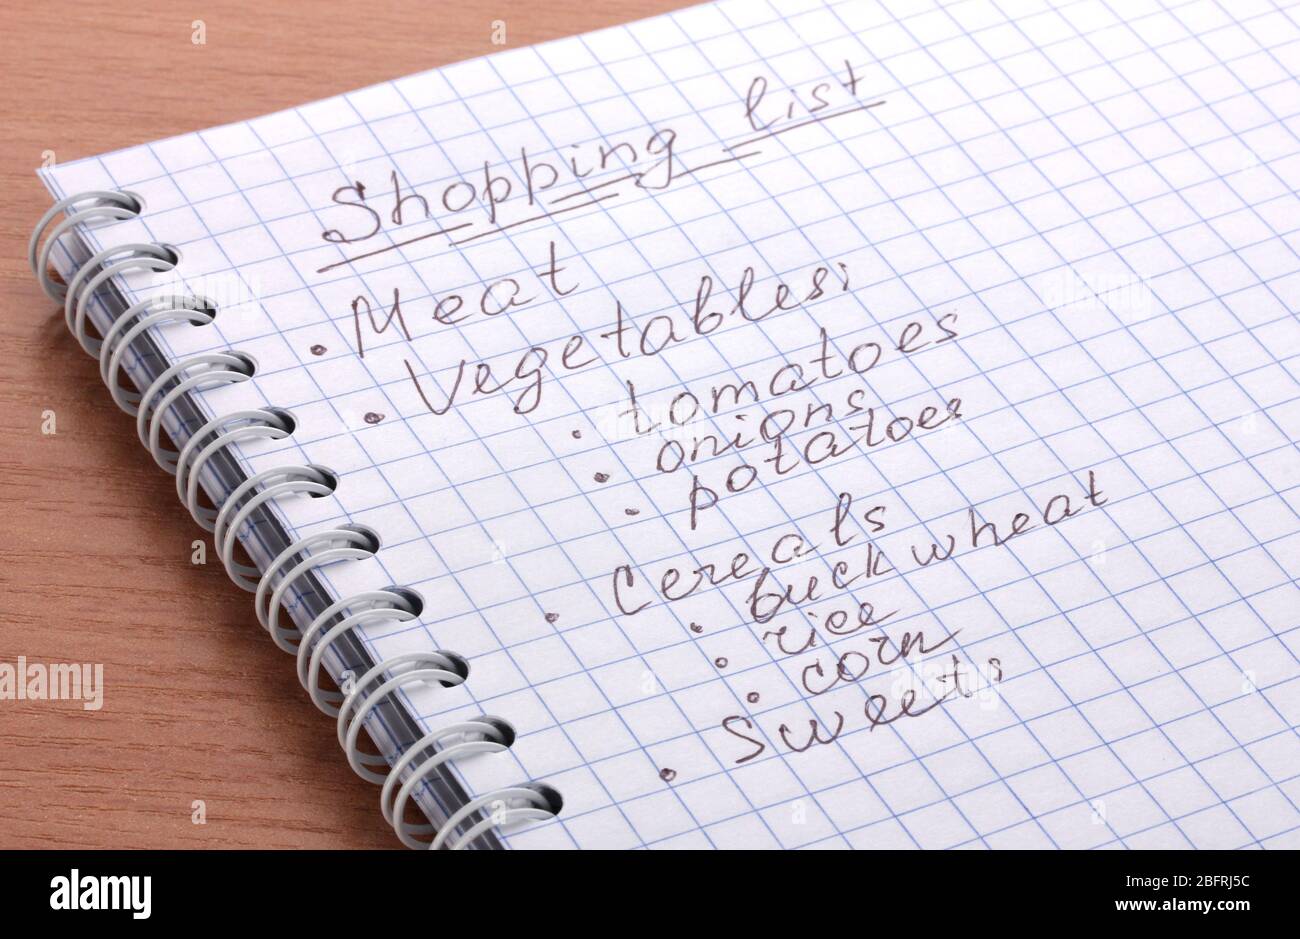 Shoping list on wooden table Stock Photo